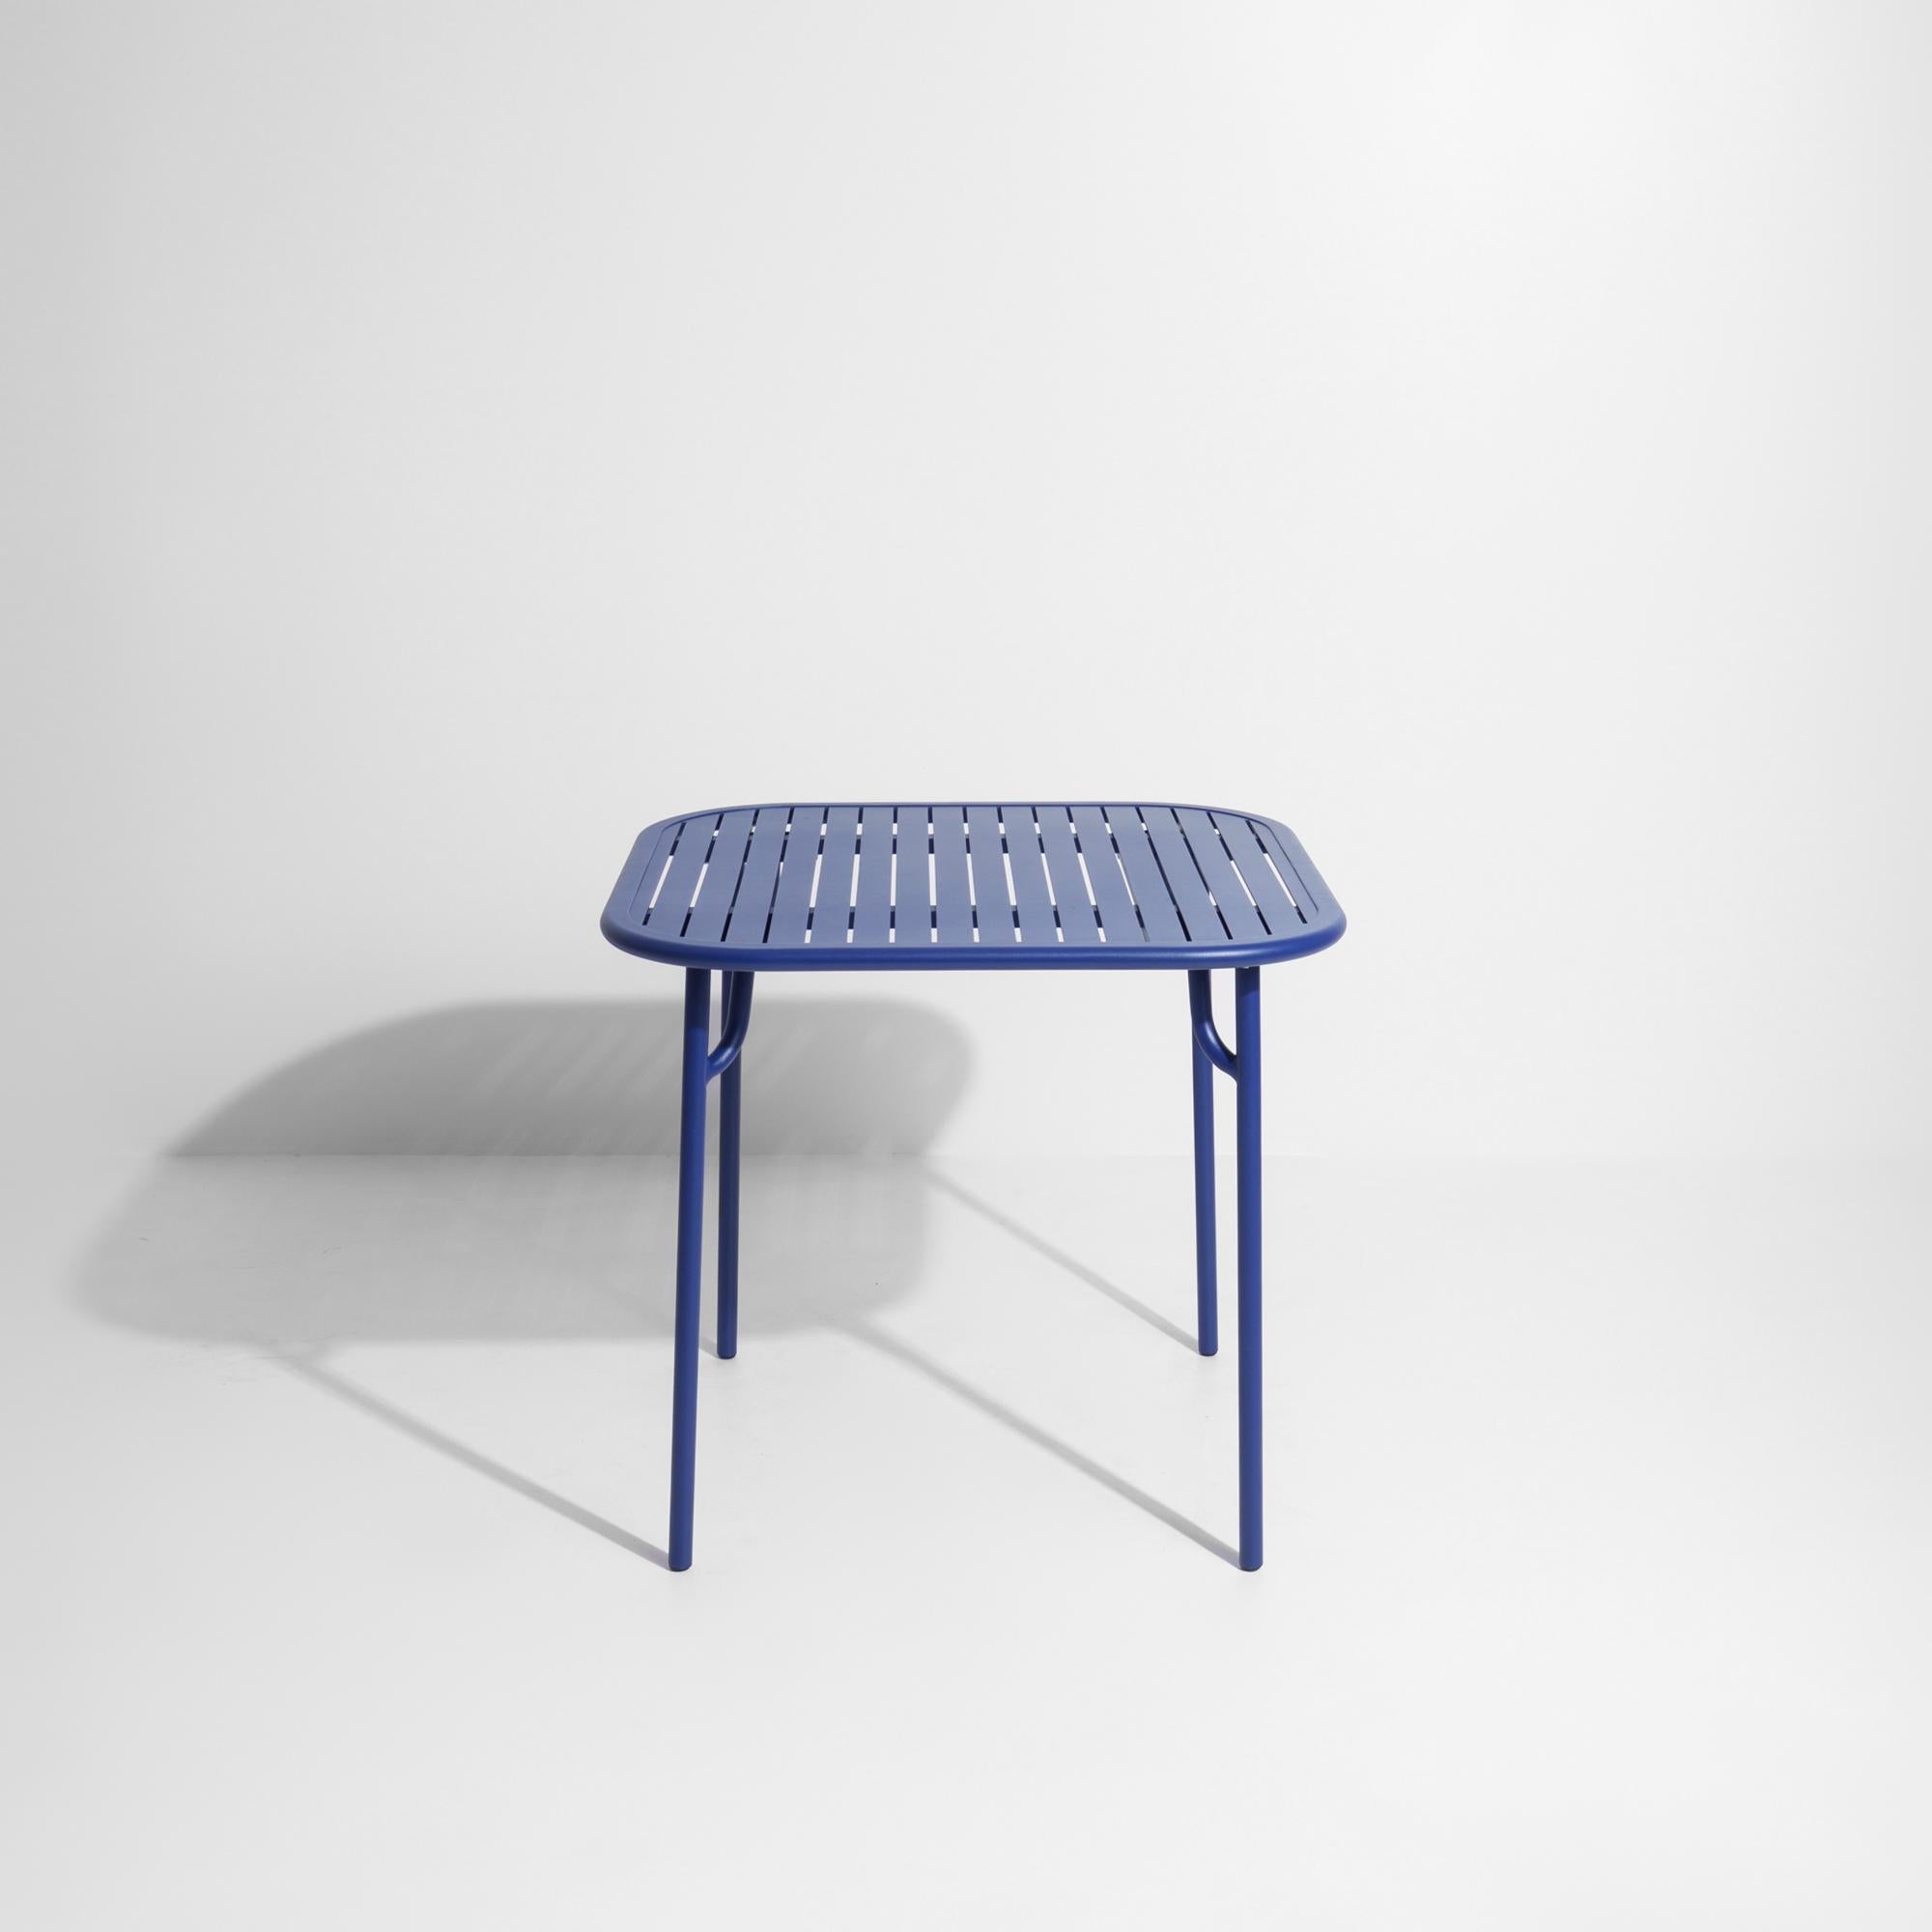 Chinese Petite Friture Week-End Square Dining Table in Blue Aluminium with Slats For Sale